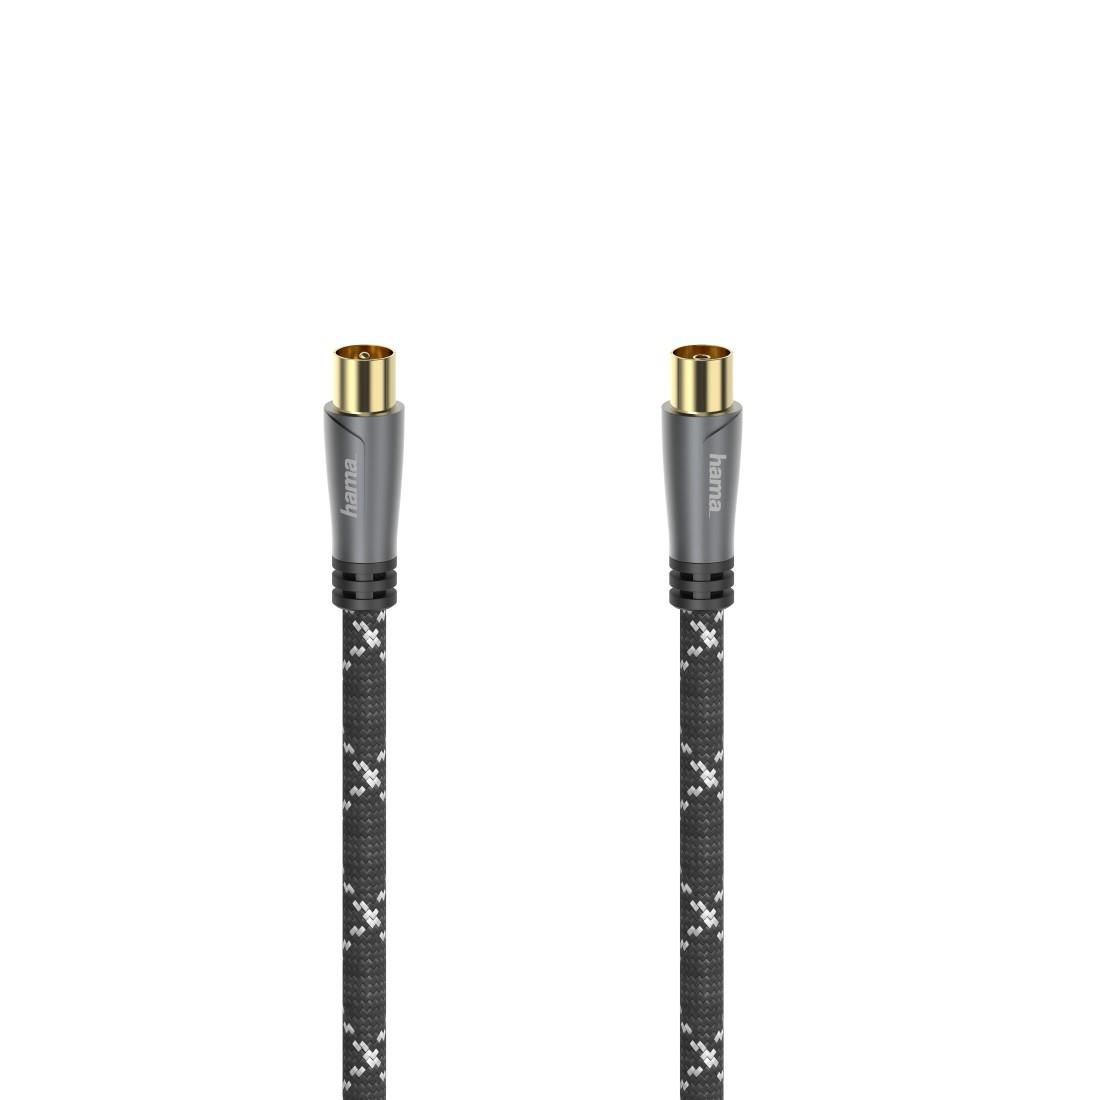 Hama 205072 W128824521 2 Coaxial Cable 5 M Black, 